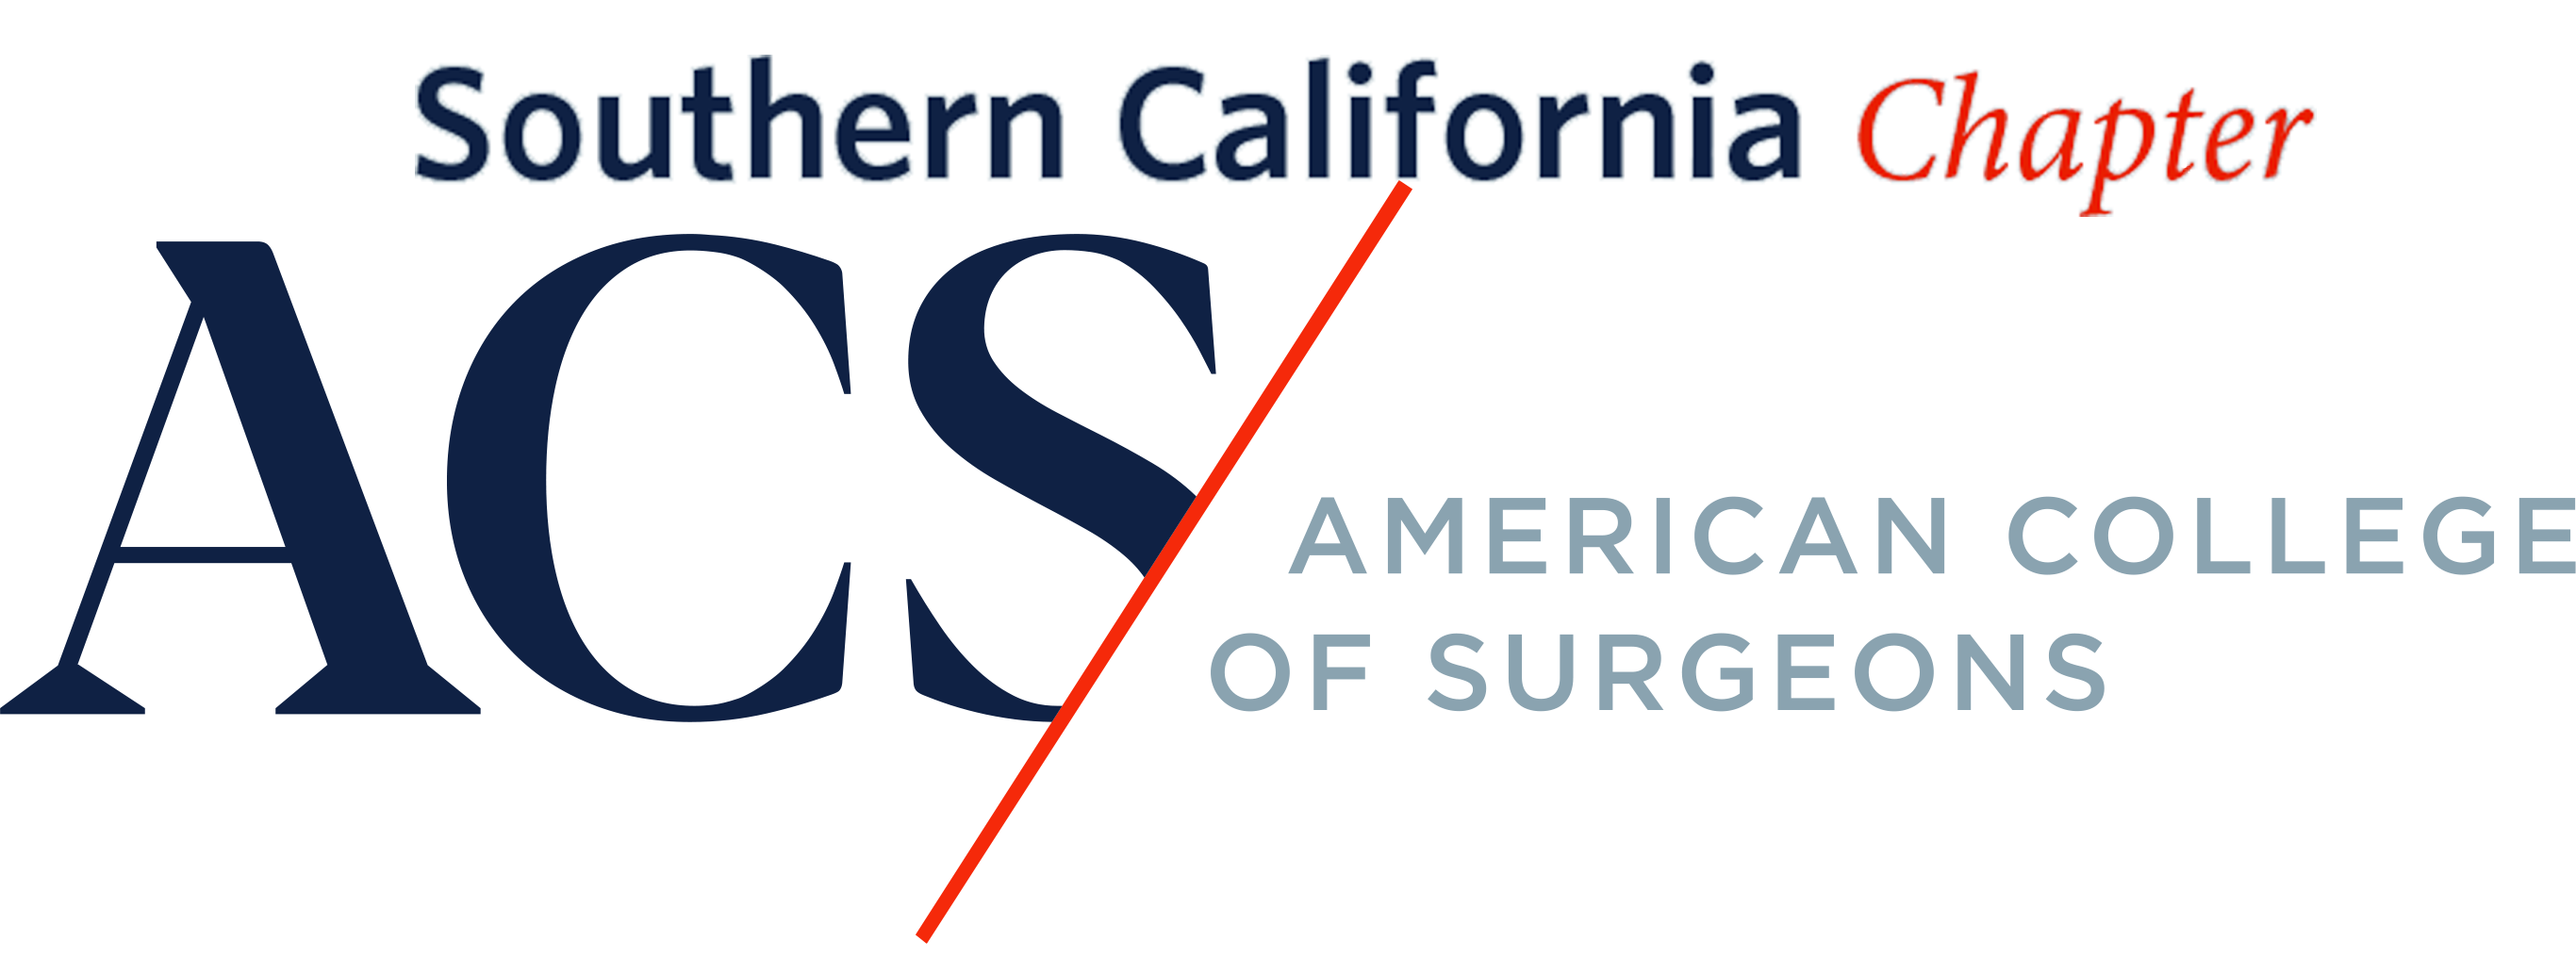 Southern California Chapter American College of Surgeons